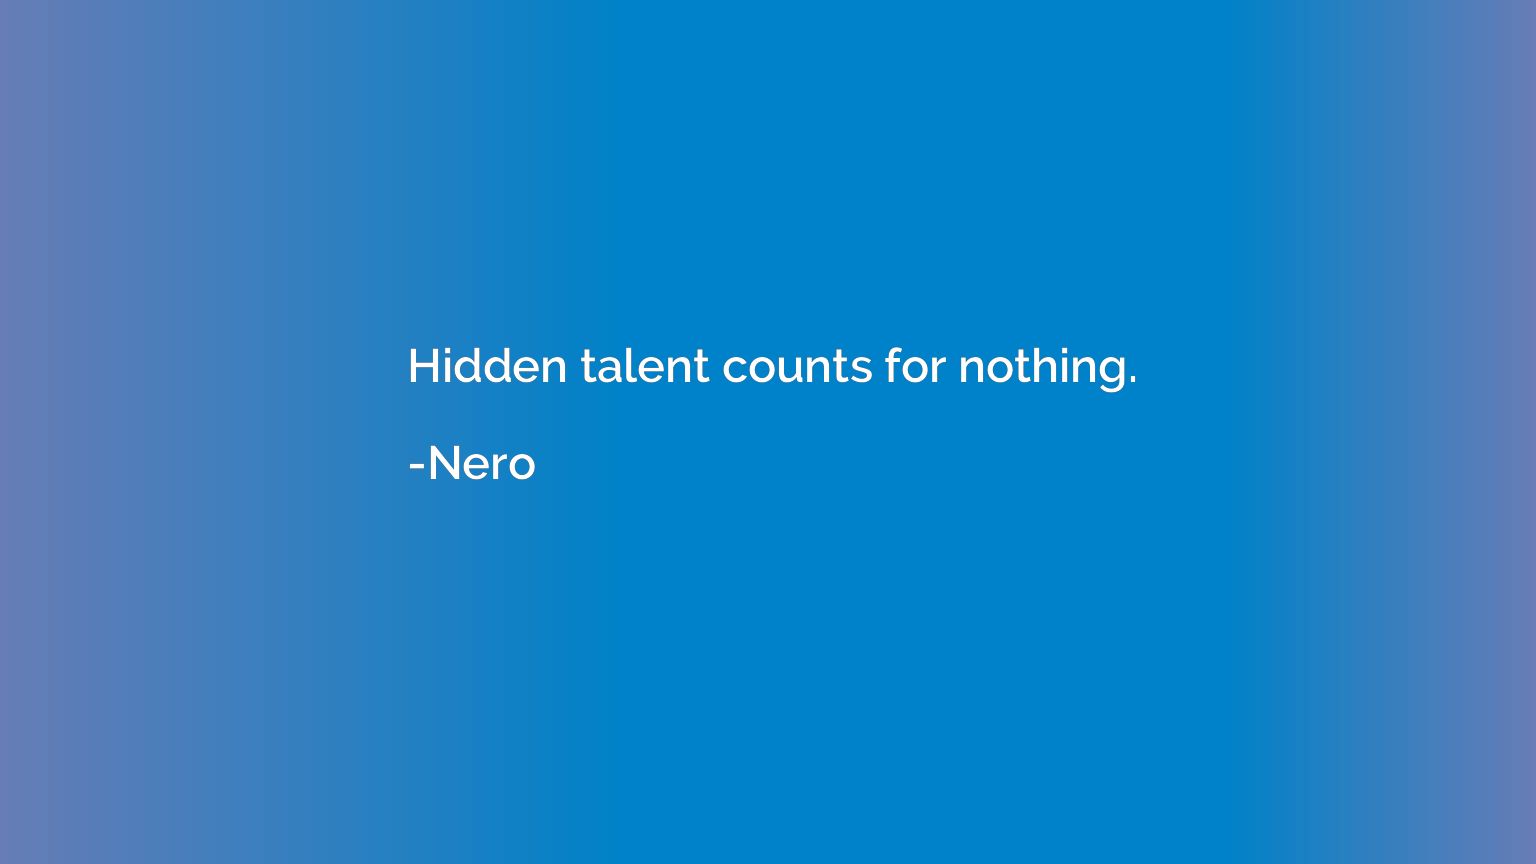 Hidden talent counts for nothing.